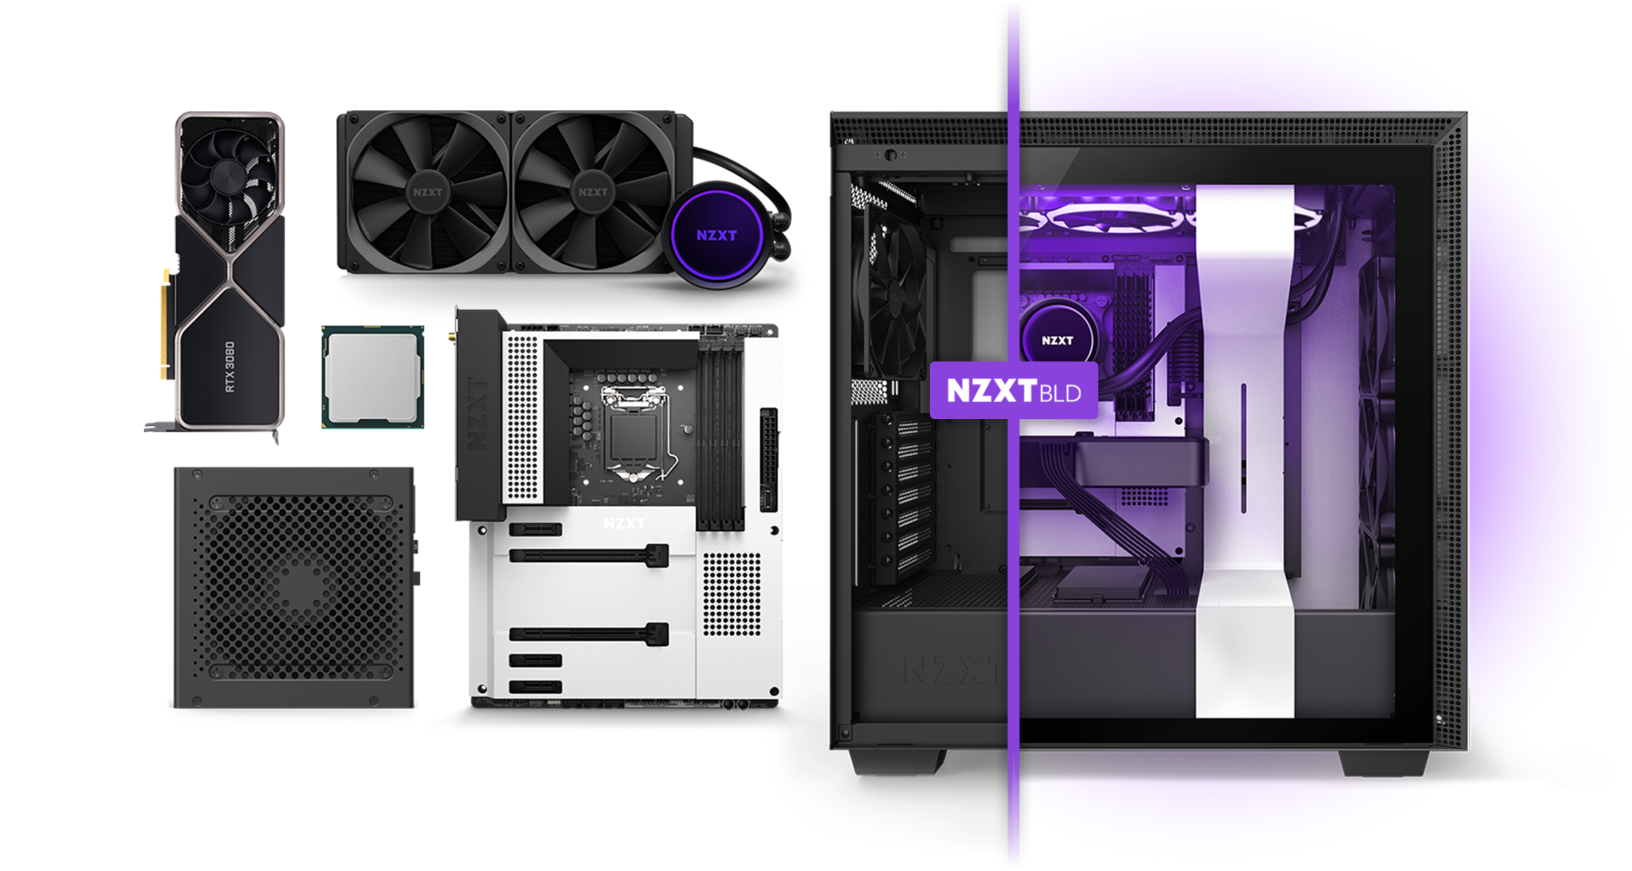 NZXT BLD Components with GPU, Kraken, N7 Motherboard, and Cseries PSU for NZXT BLD launch in Spain, New Zealand, an Unified Kingdom